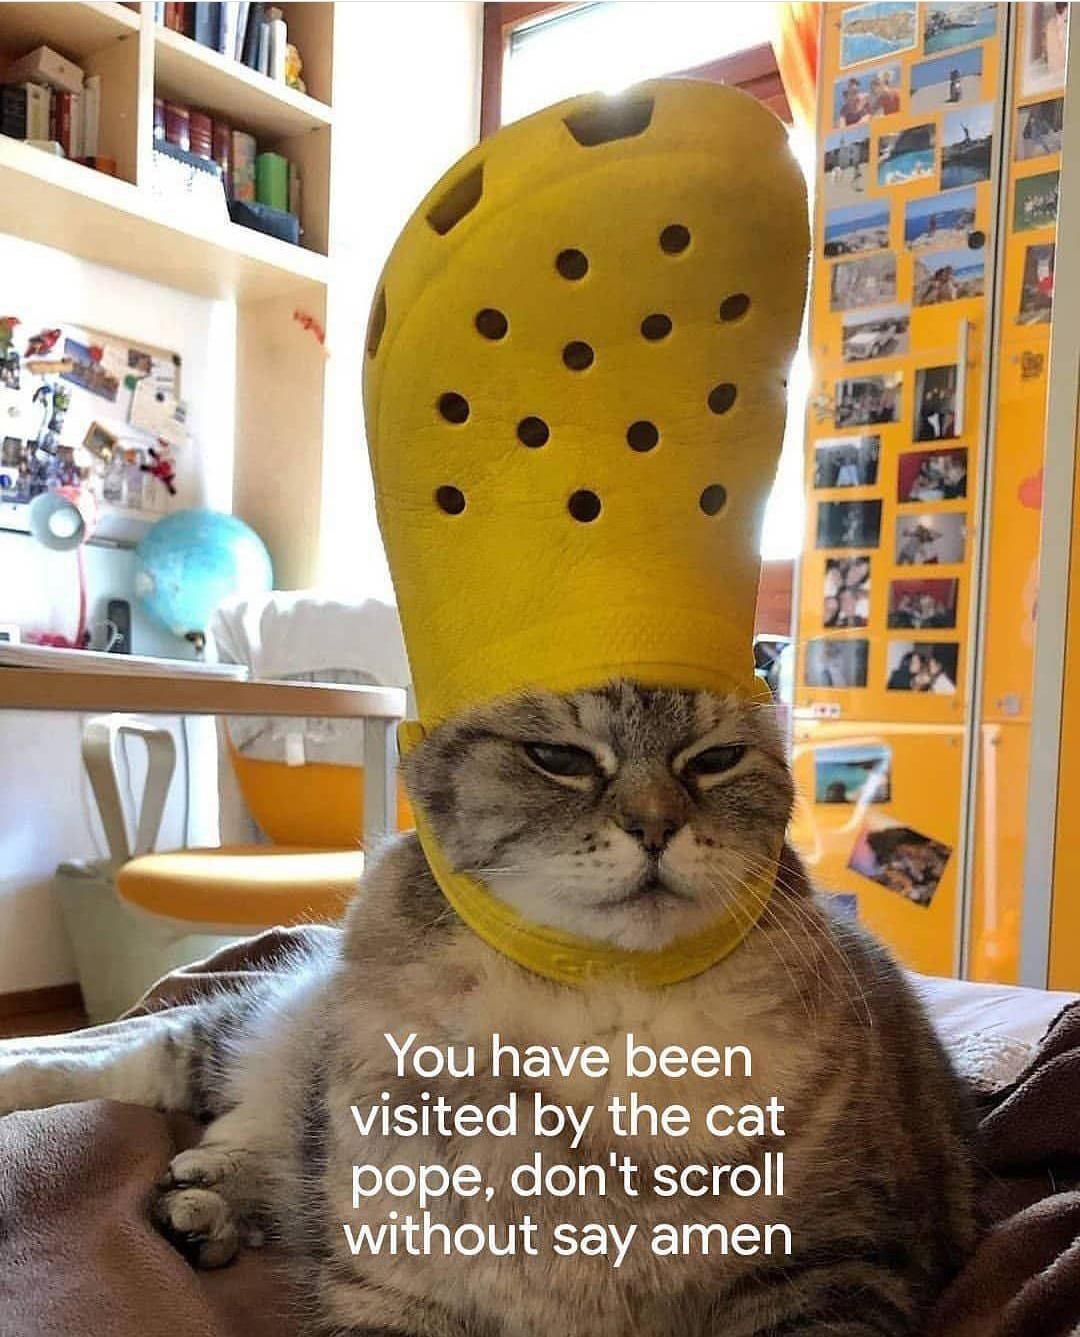 really funny pictures - cat pope - You have been visited by the cat pope, don't scroll without say amen